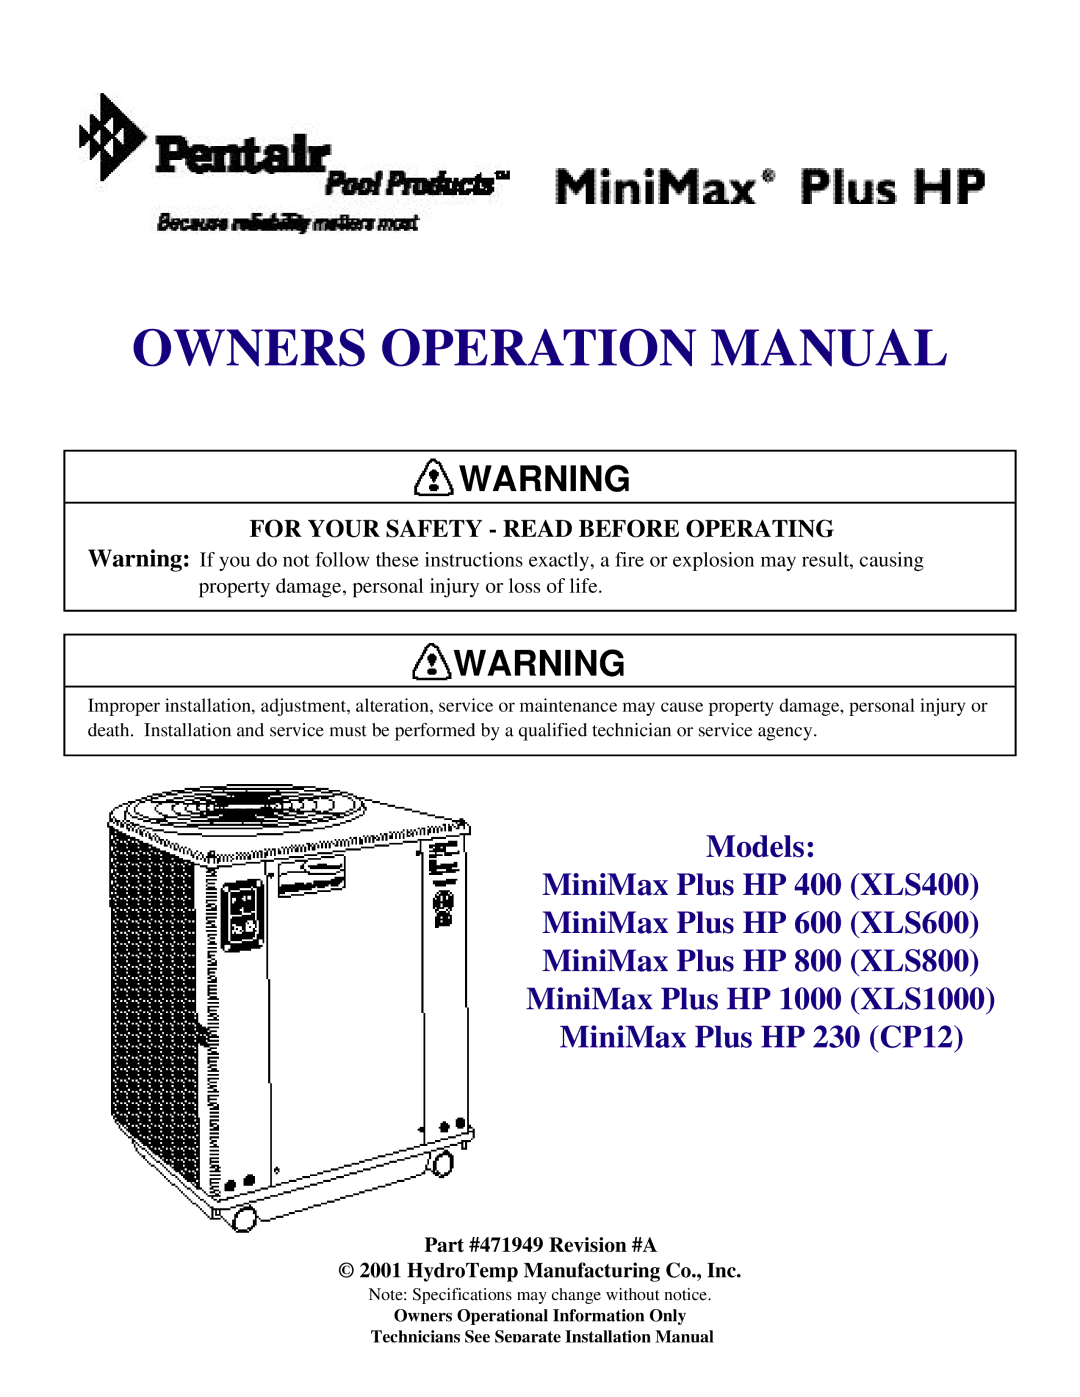 Pentair XLS1000, CP12 operation manual For Your Safety Read Before Operating, Revision #A HydroTemp Manufacturing Co., Inc 